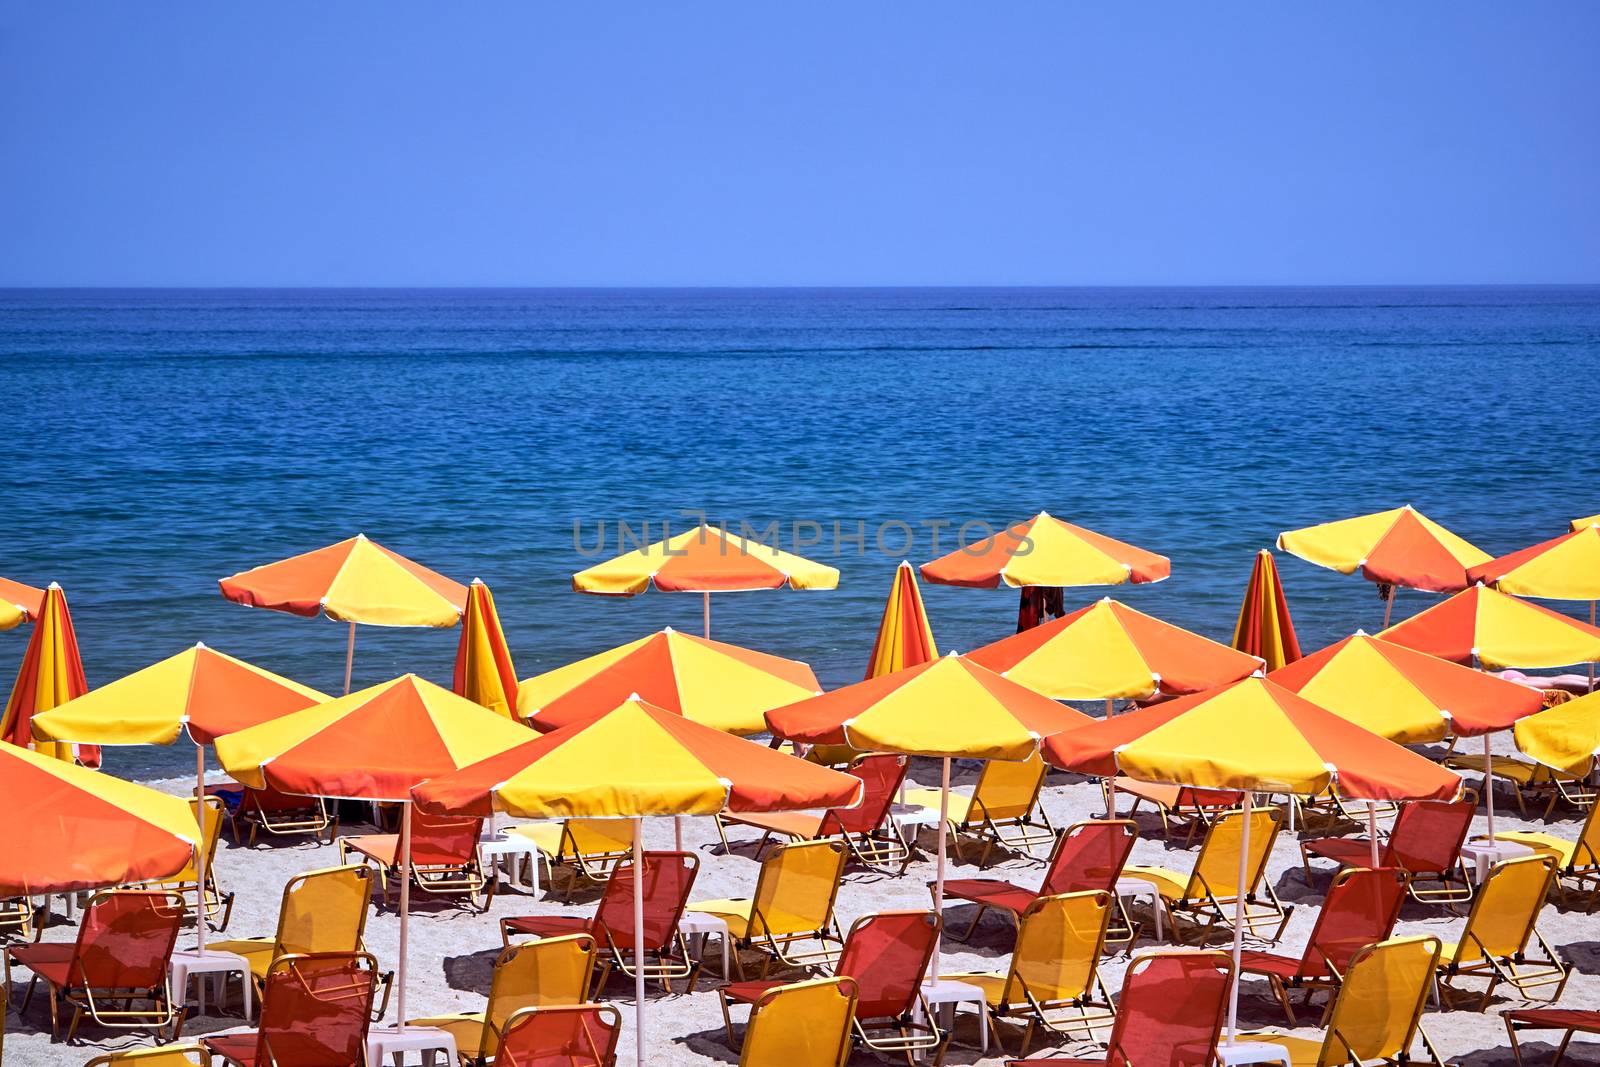 Umbrellas and beds on a sandy beach on the island of Crete